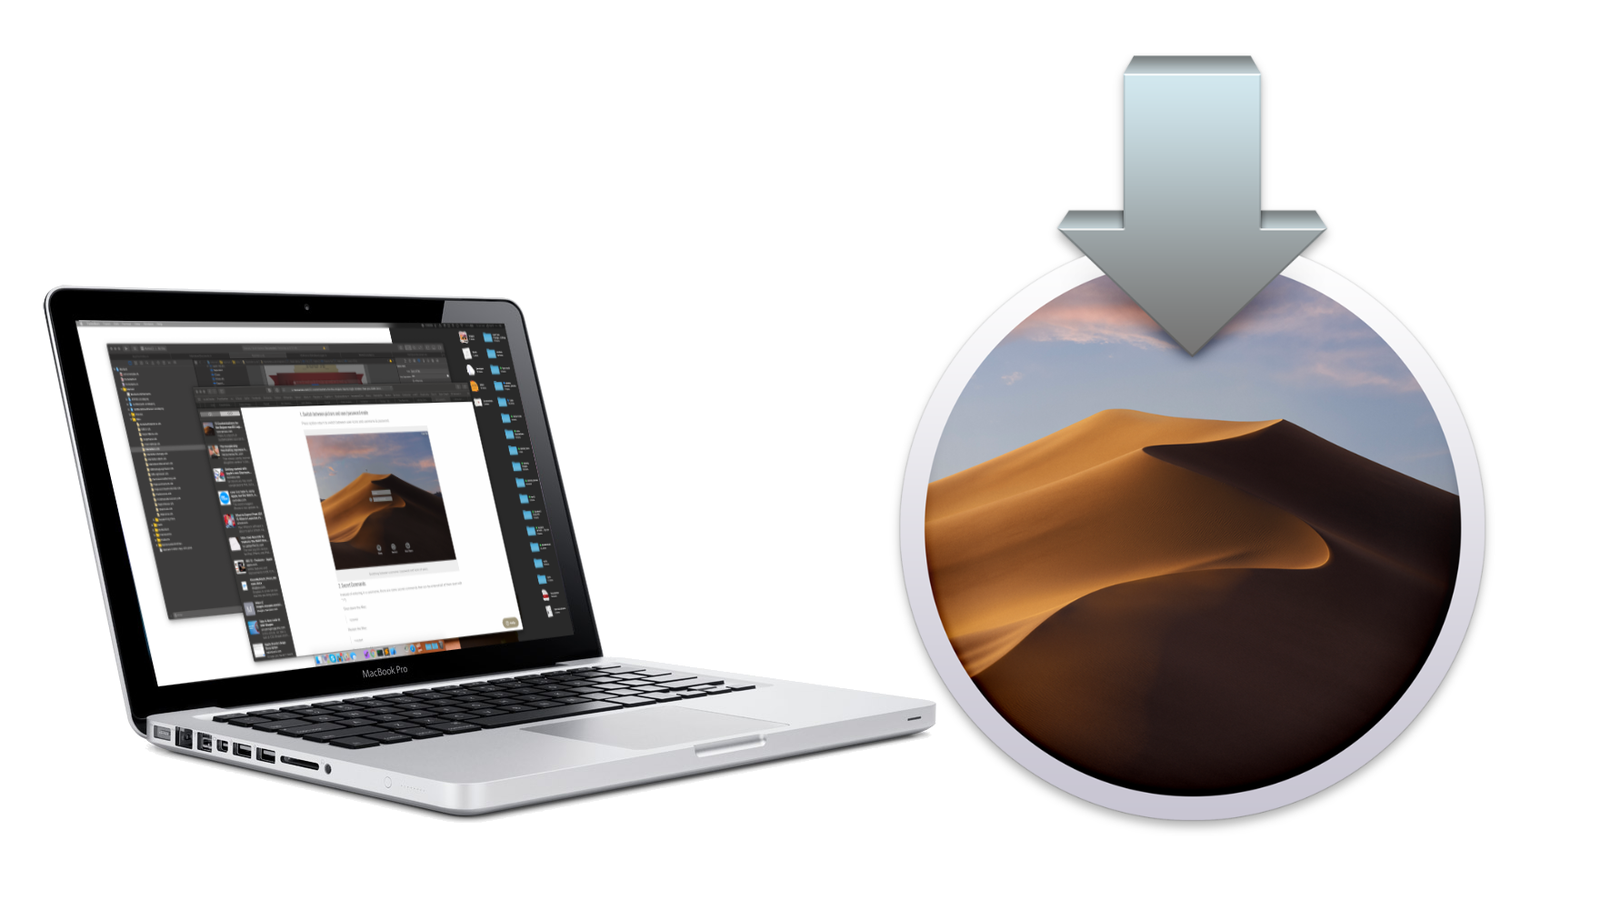 is mac mini late 2012 eligible for mojave upgrade?